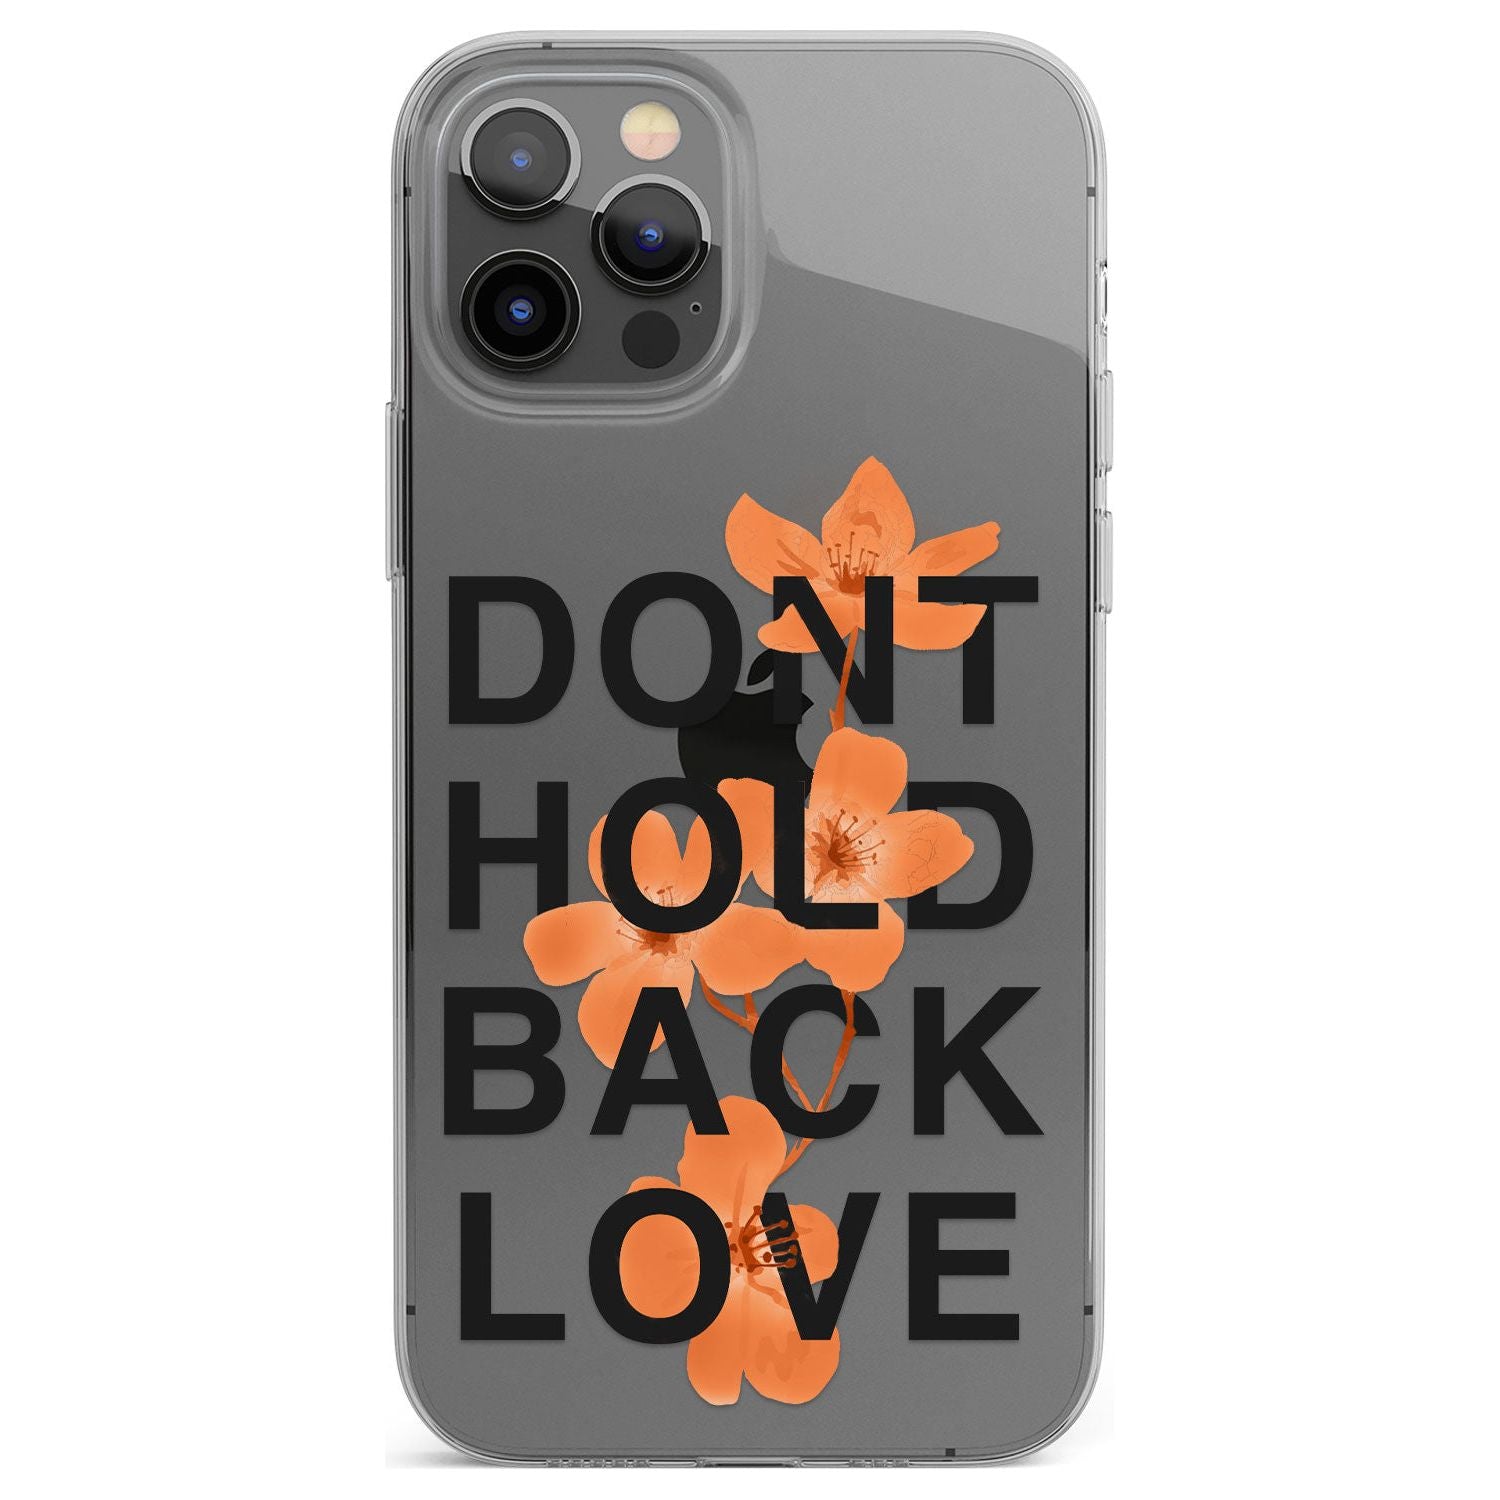 Don't Hold Back Love - Blue & White Phone Case for iPhone 12 Pro